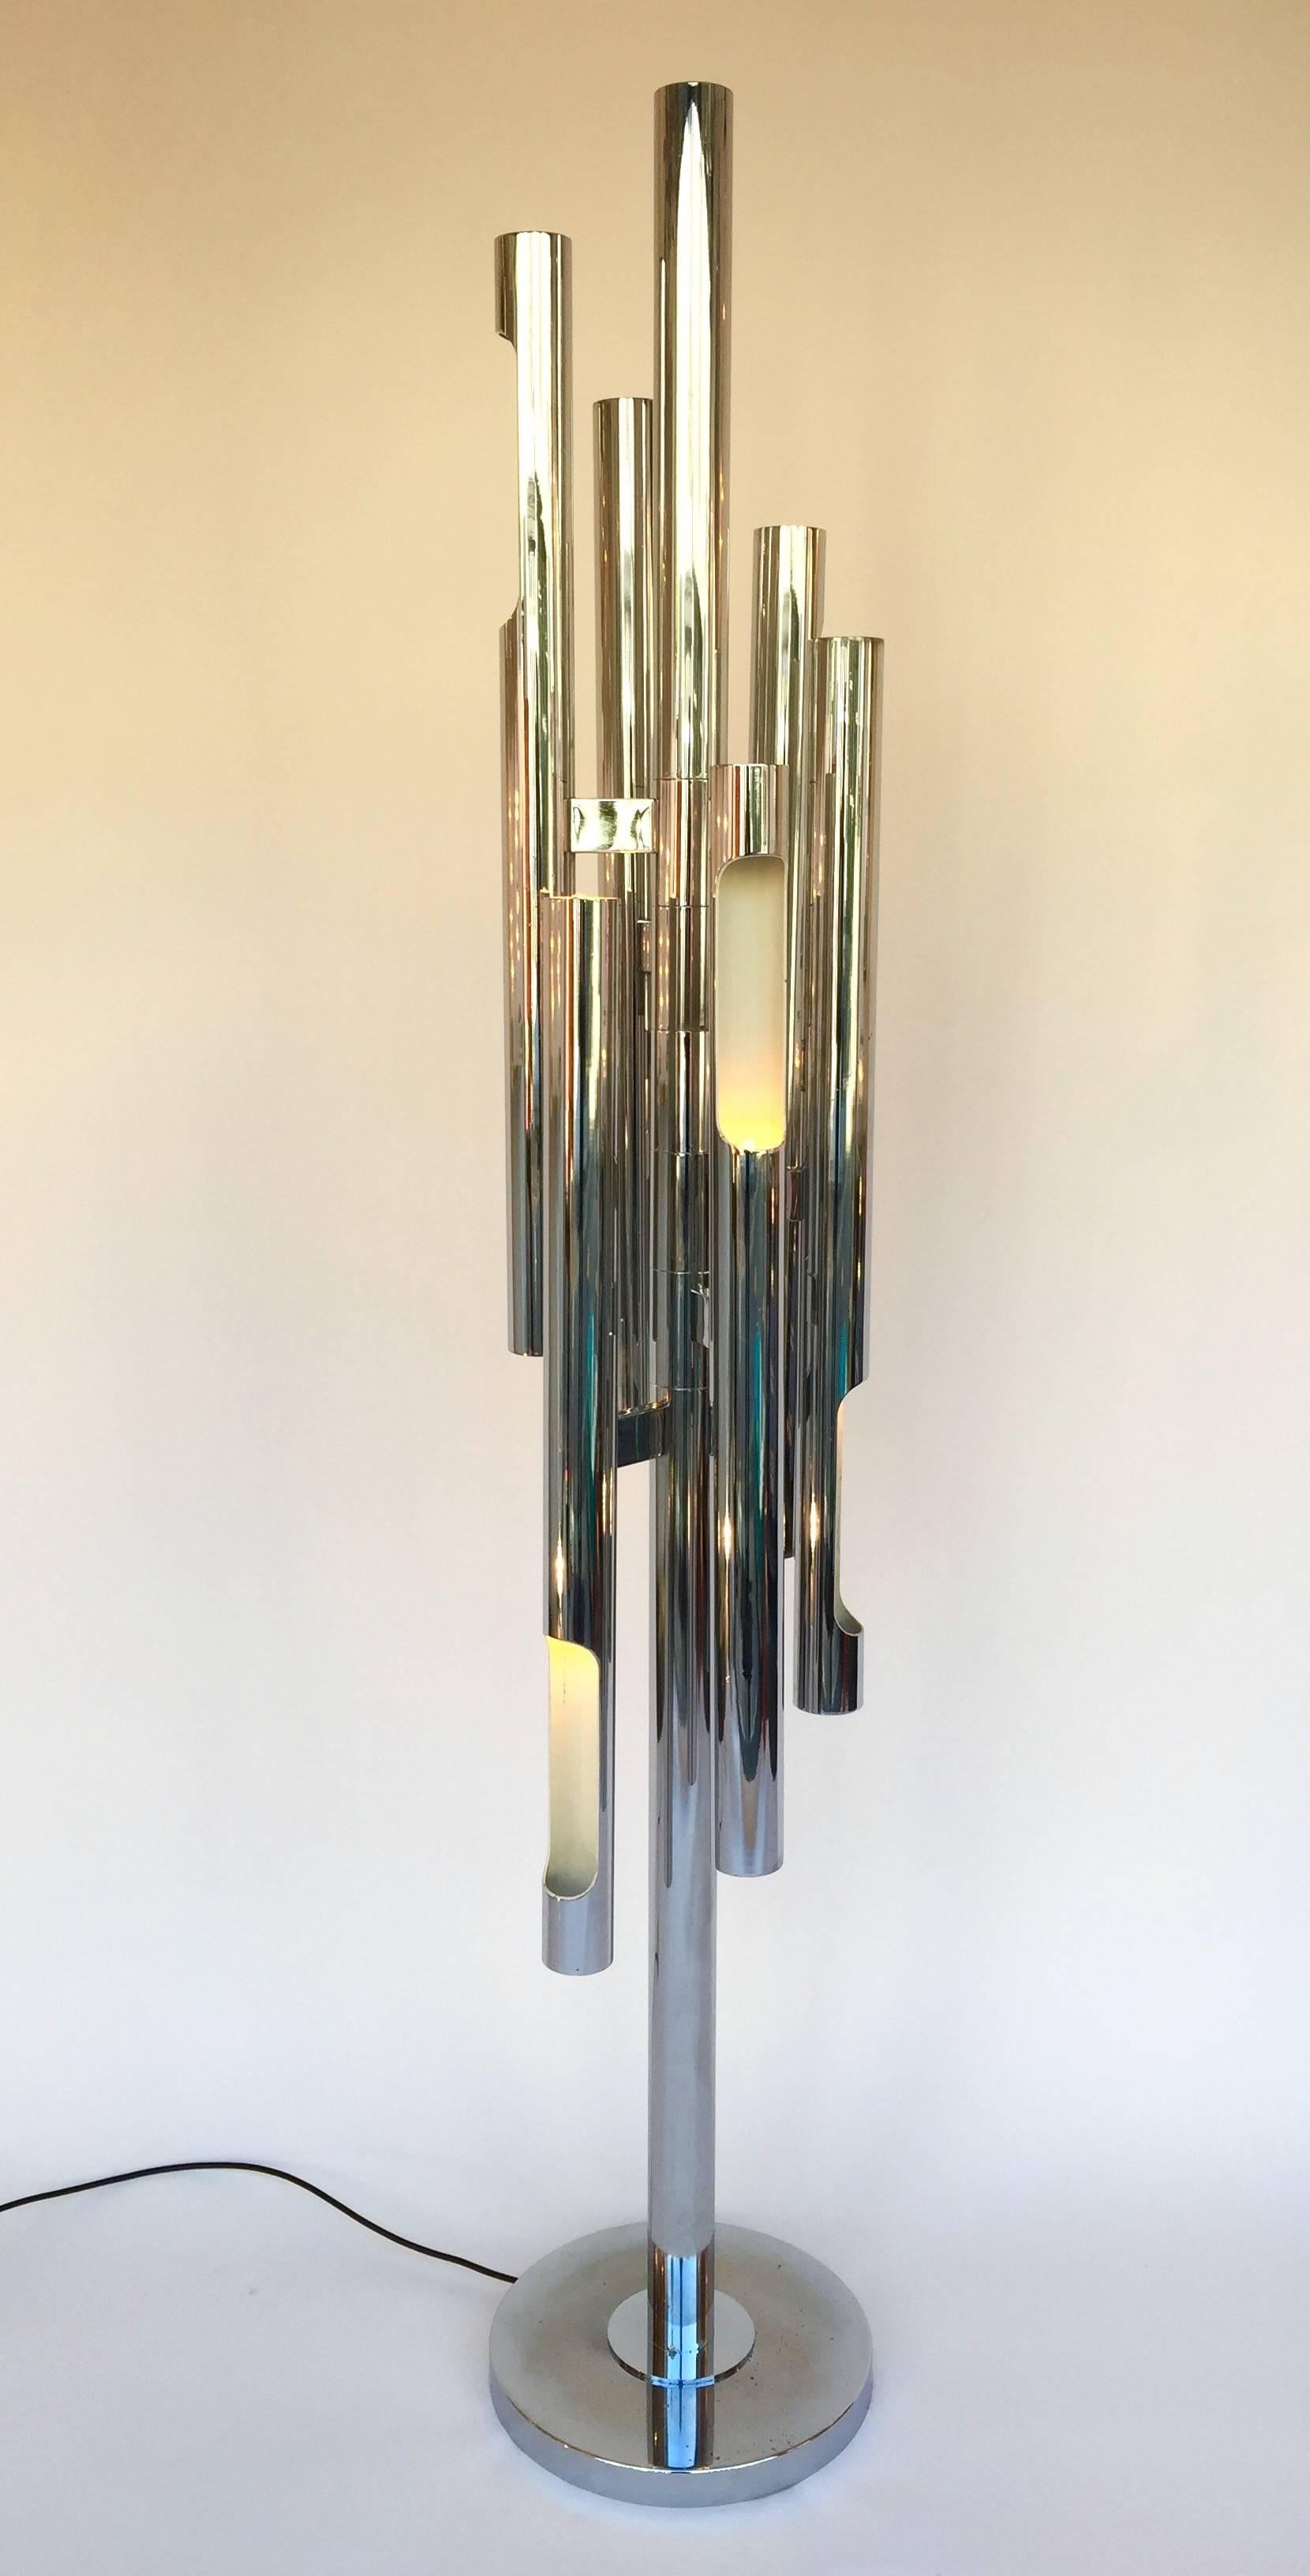 Uncommon late Mid-Century Modern sculptural organ floor lamp by the designer Gaetano Sciolari. Metal chrome, inside tube lacquered. Double light switch, 14 lights. Sciolari is a famous manufacturer of the 1970s and 1980s like Reggiani. Iconic